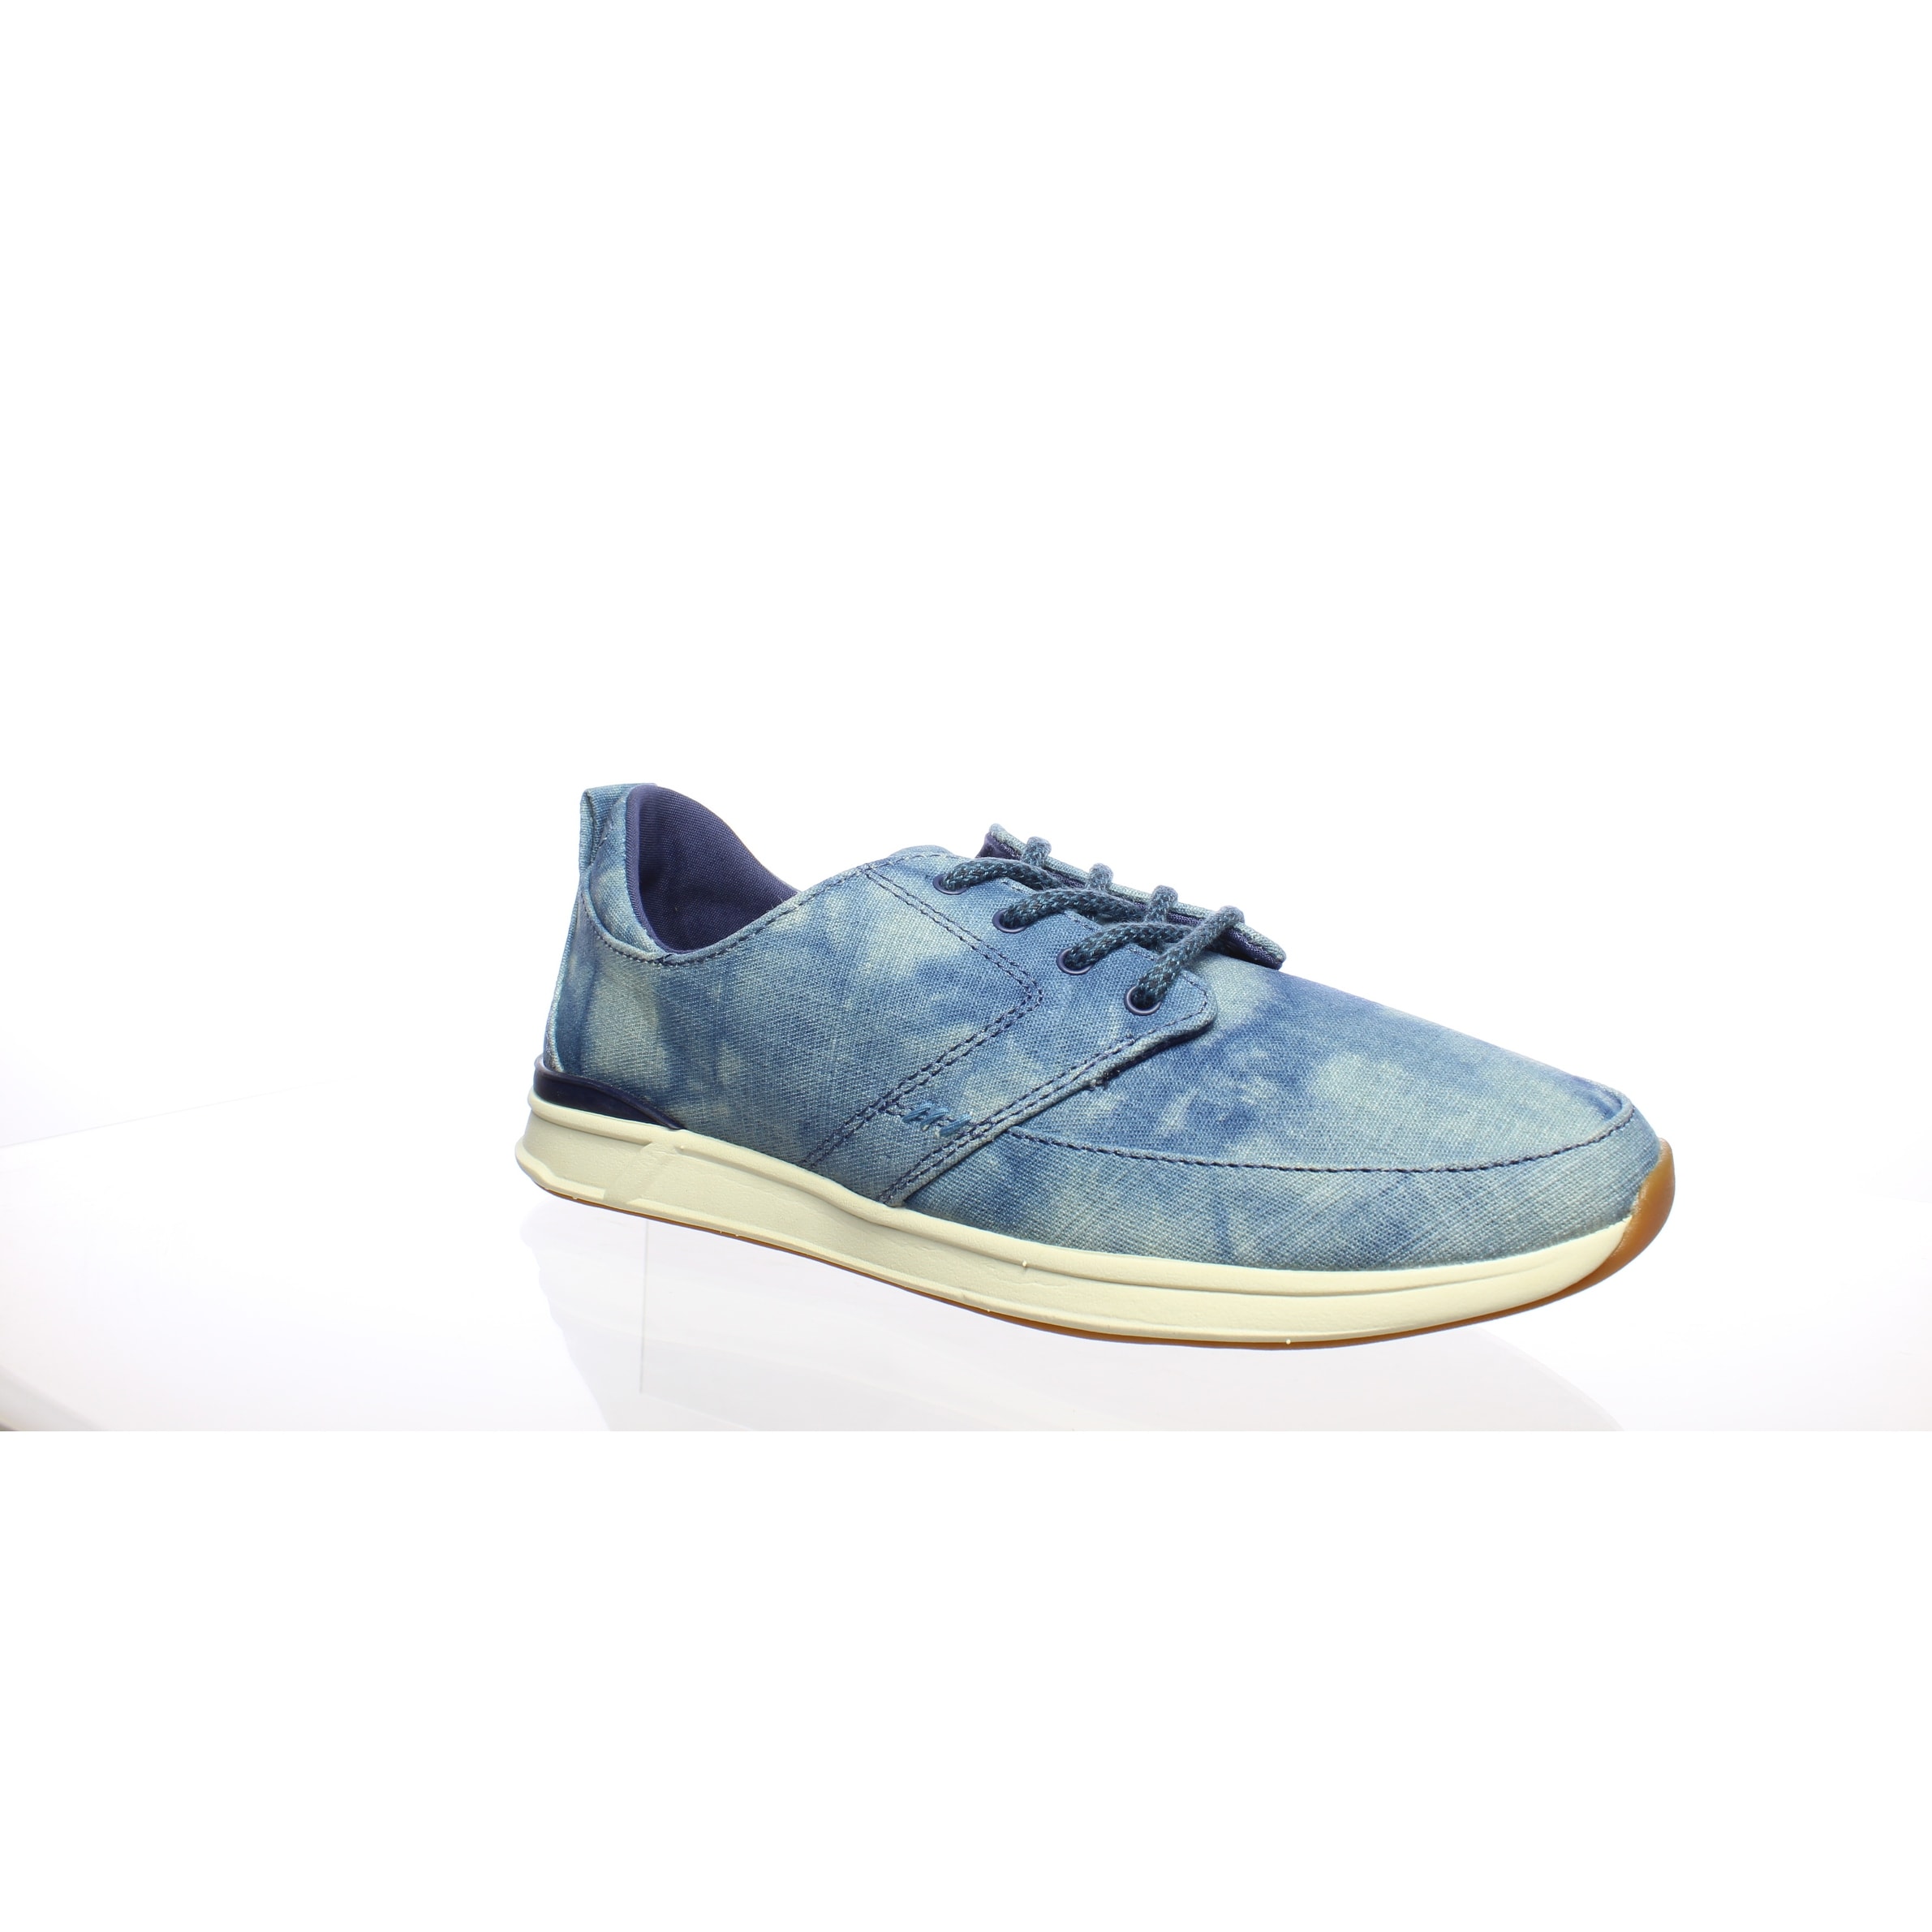 Reef Womens Rover Low Tx Crown Blue 